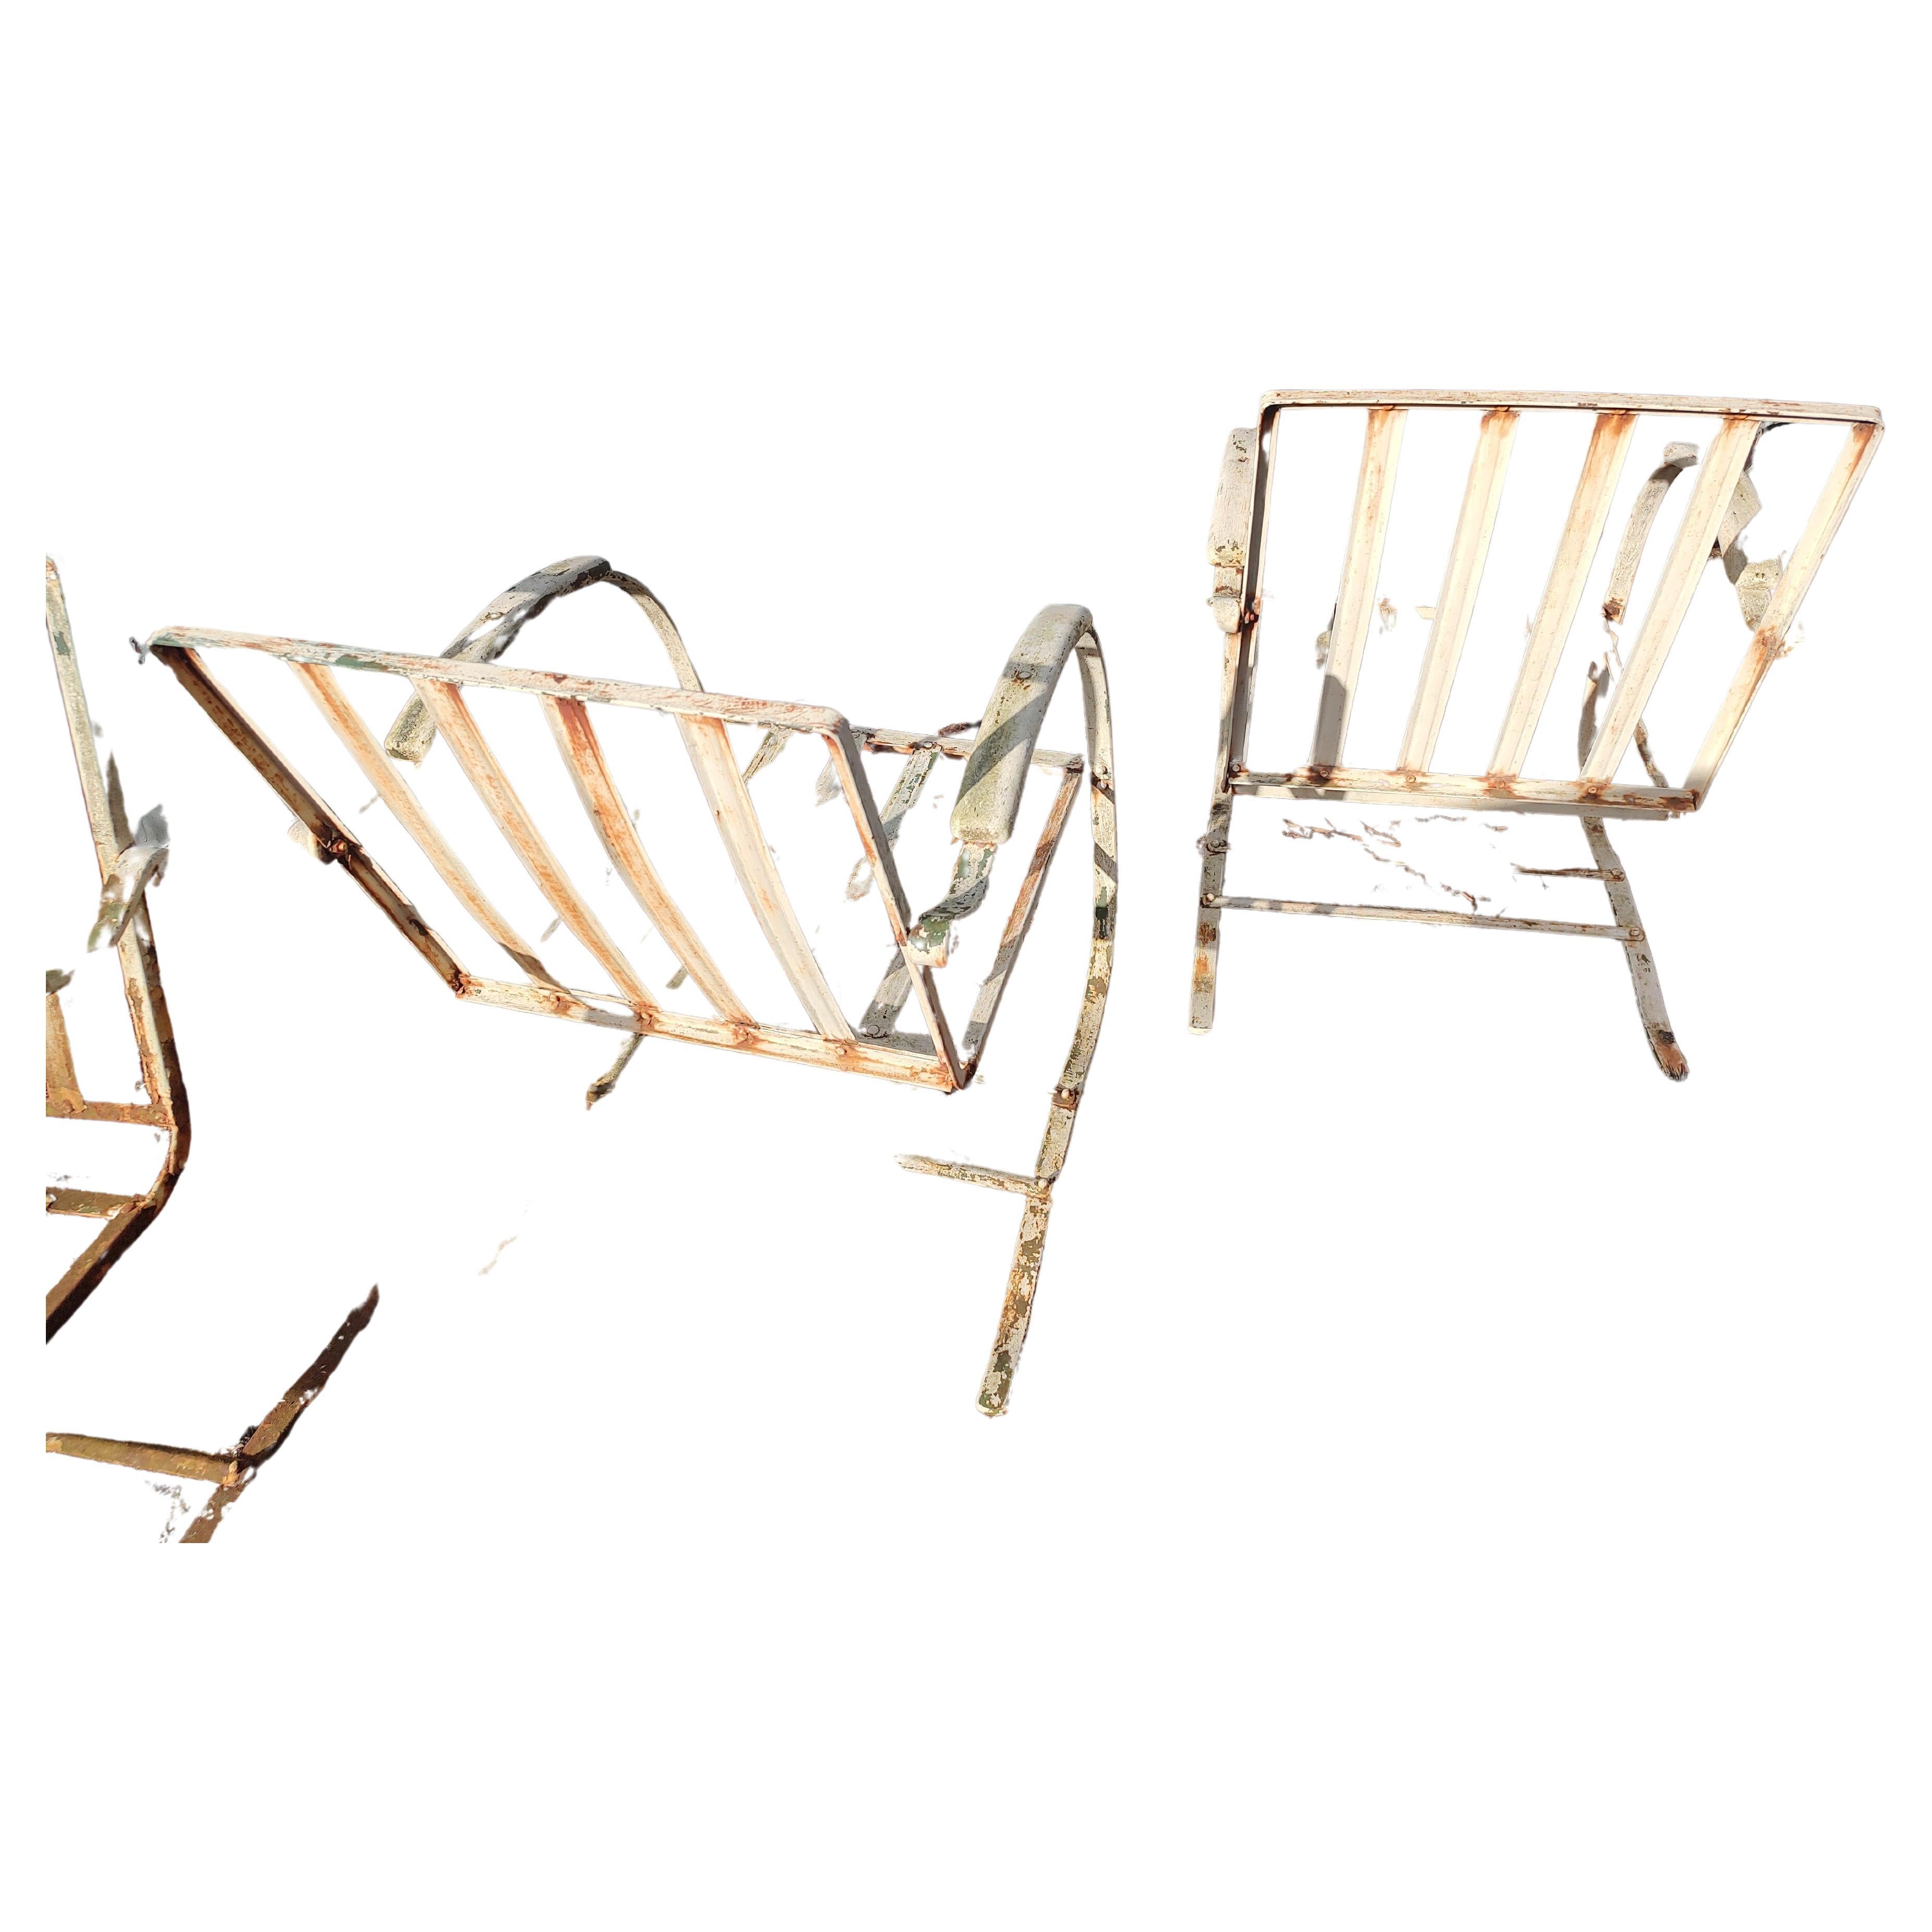 Two Pairs of Art Deco Cantilevered Spring Steel & Iron Lounge Chairs C1948 For Sale 1